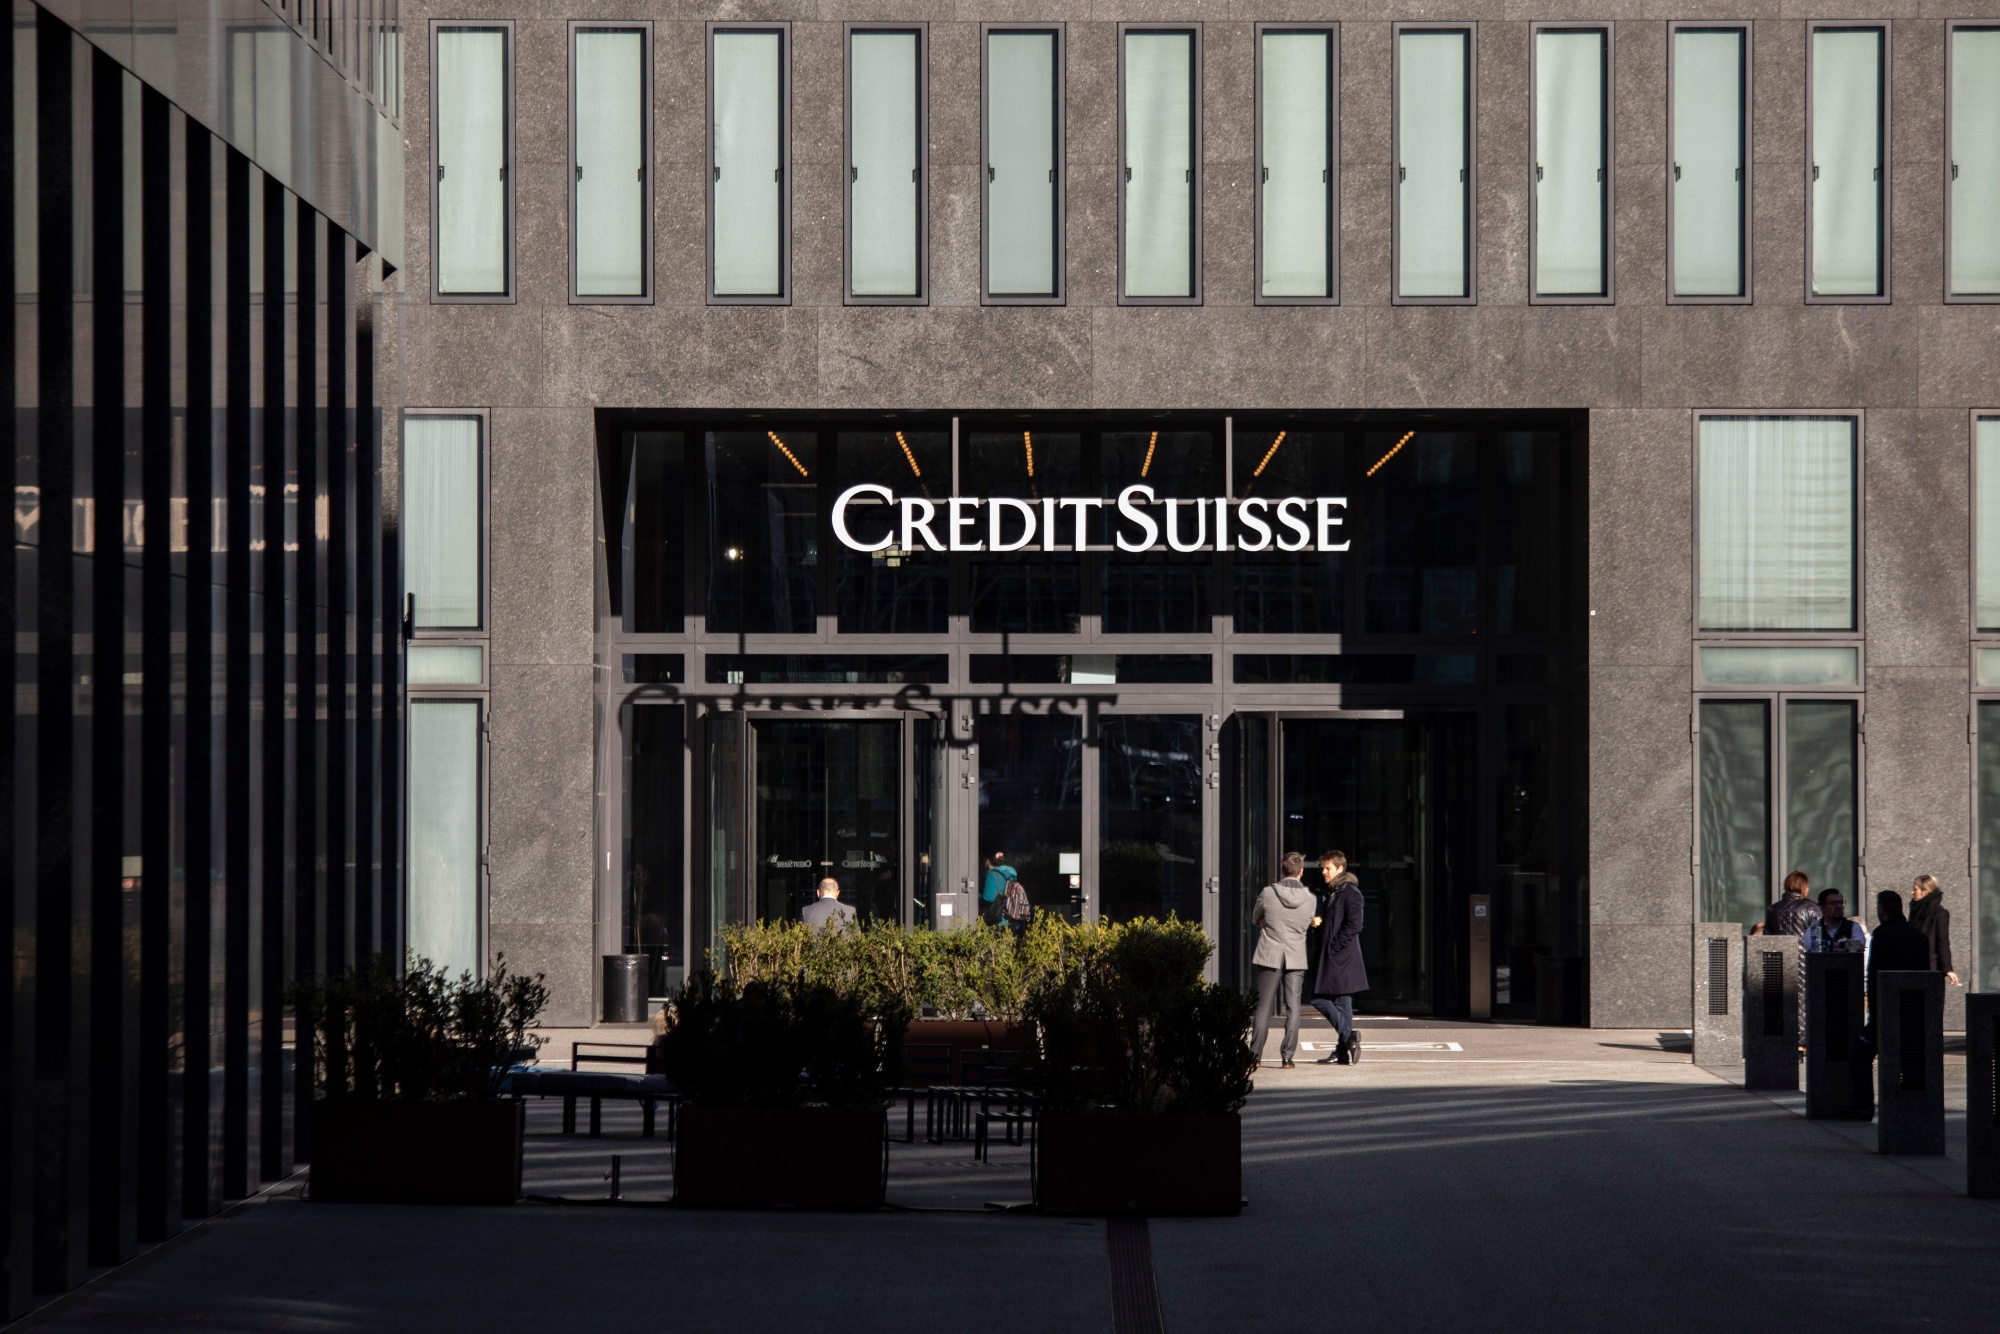 Office workers outside the Credit Suisse Group office tower in Zurich, Switzerland, on Thursday.